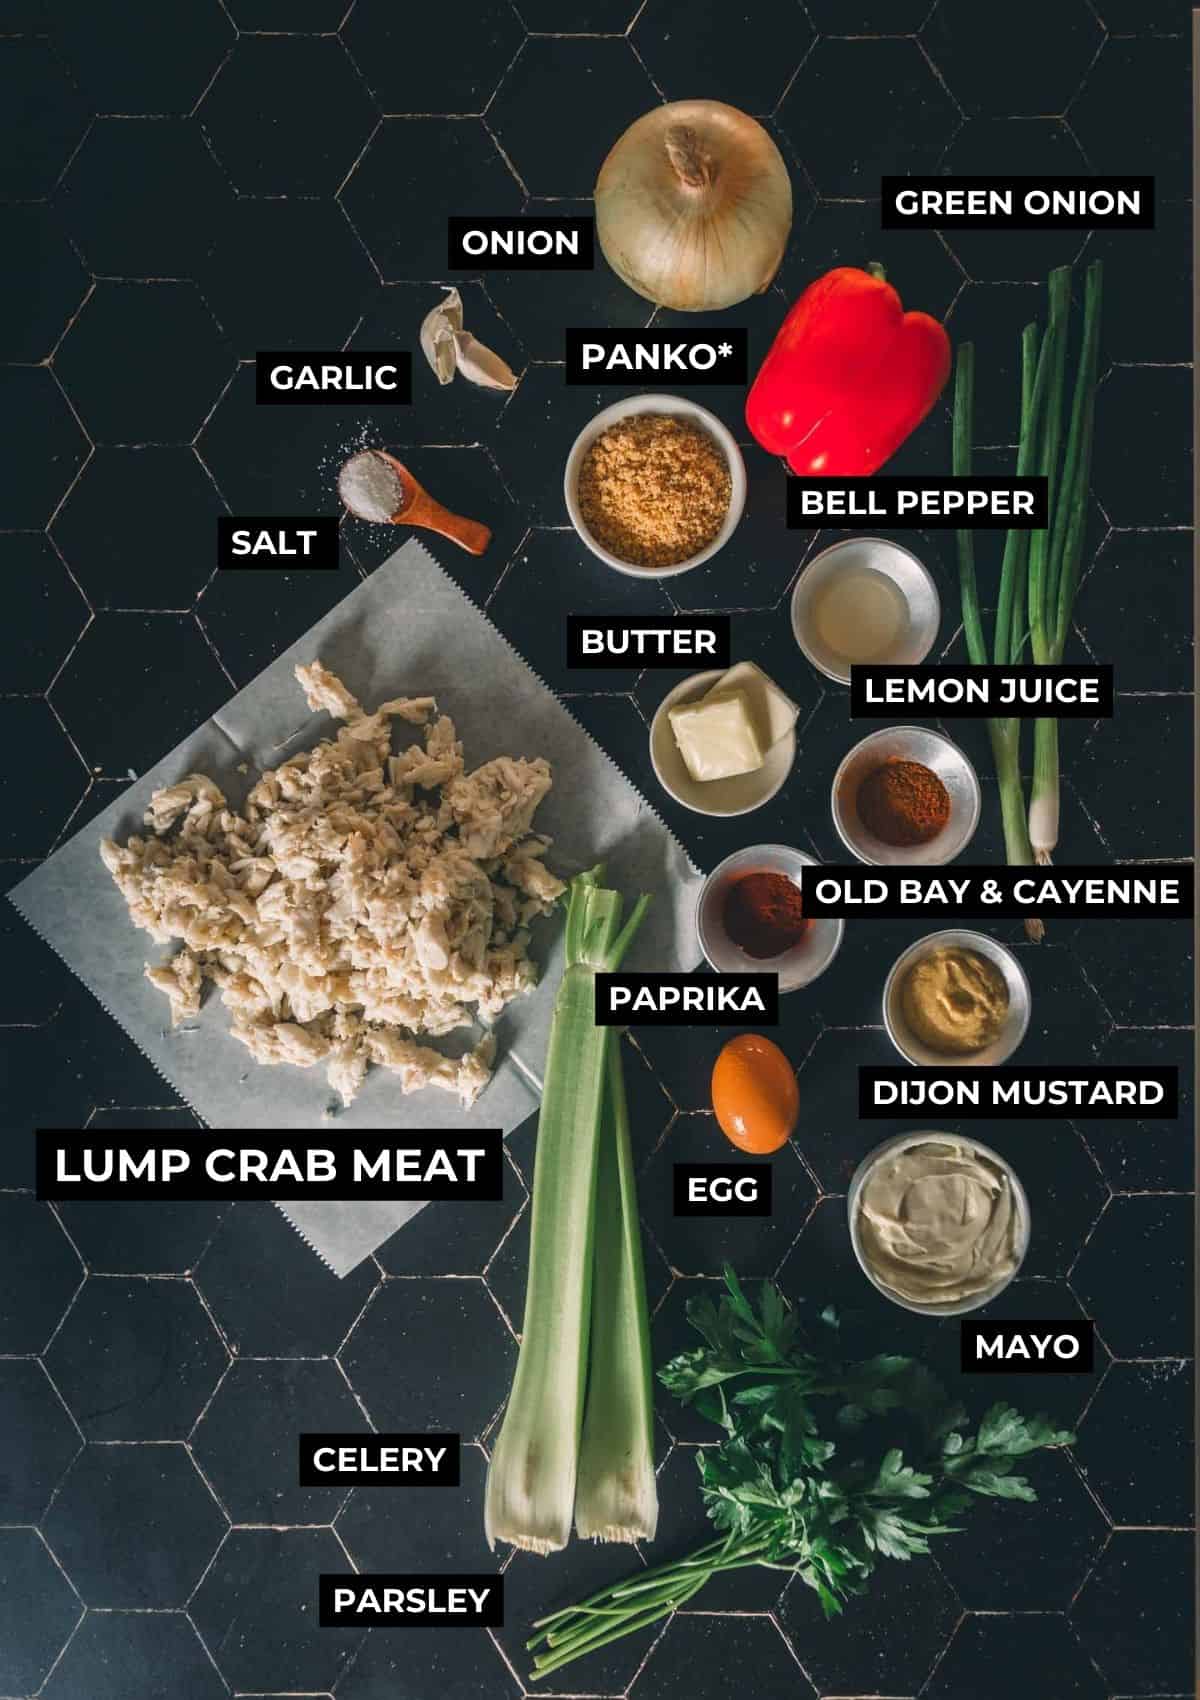 Ingredients for this crab recipe arranged on a black table.